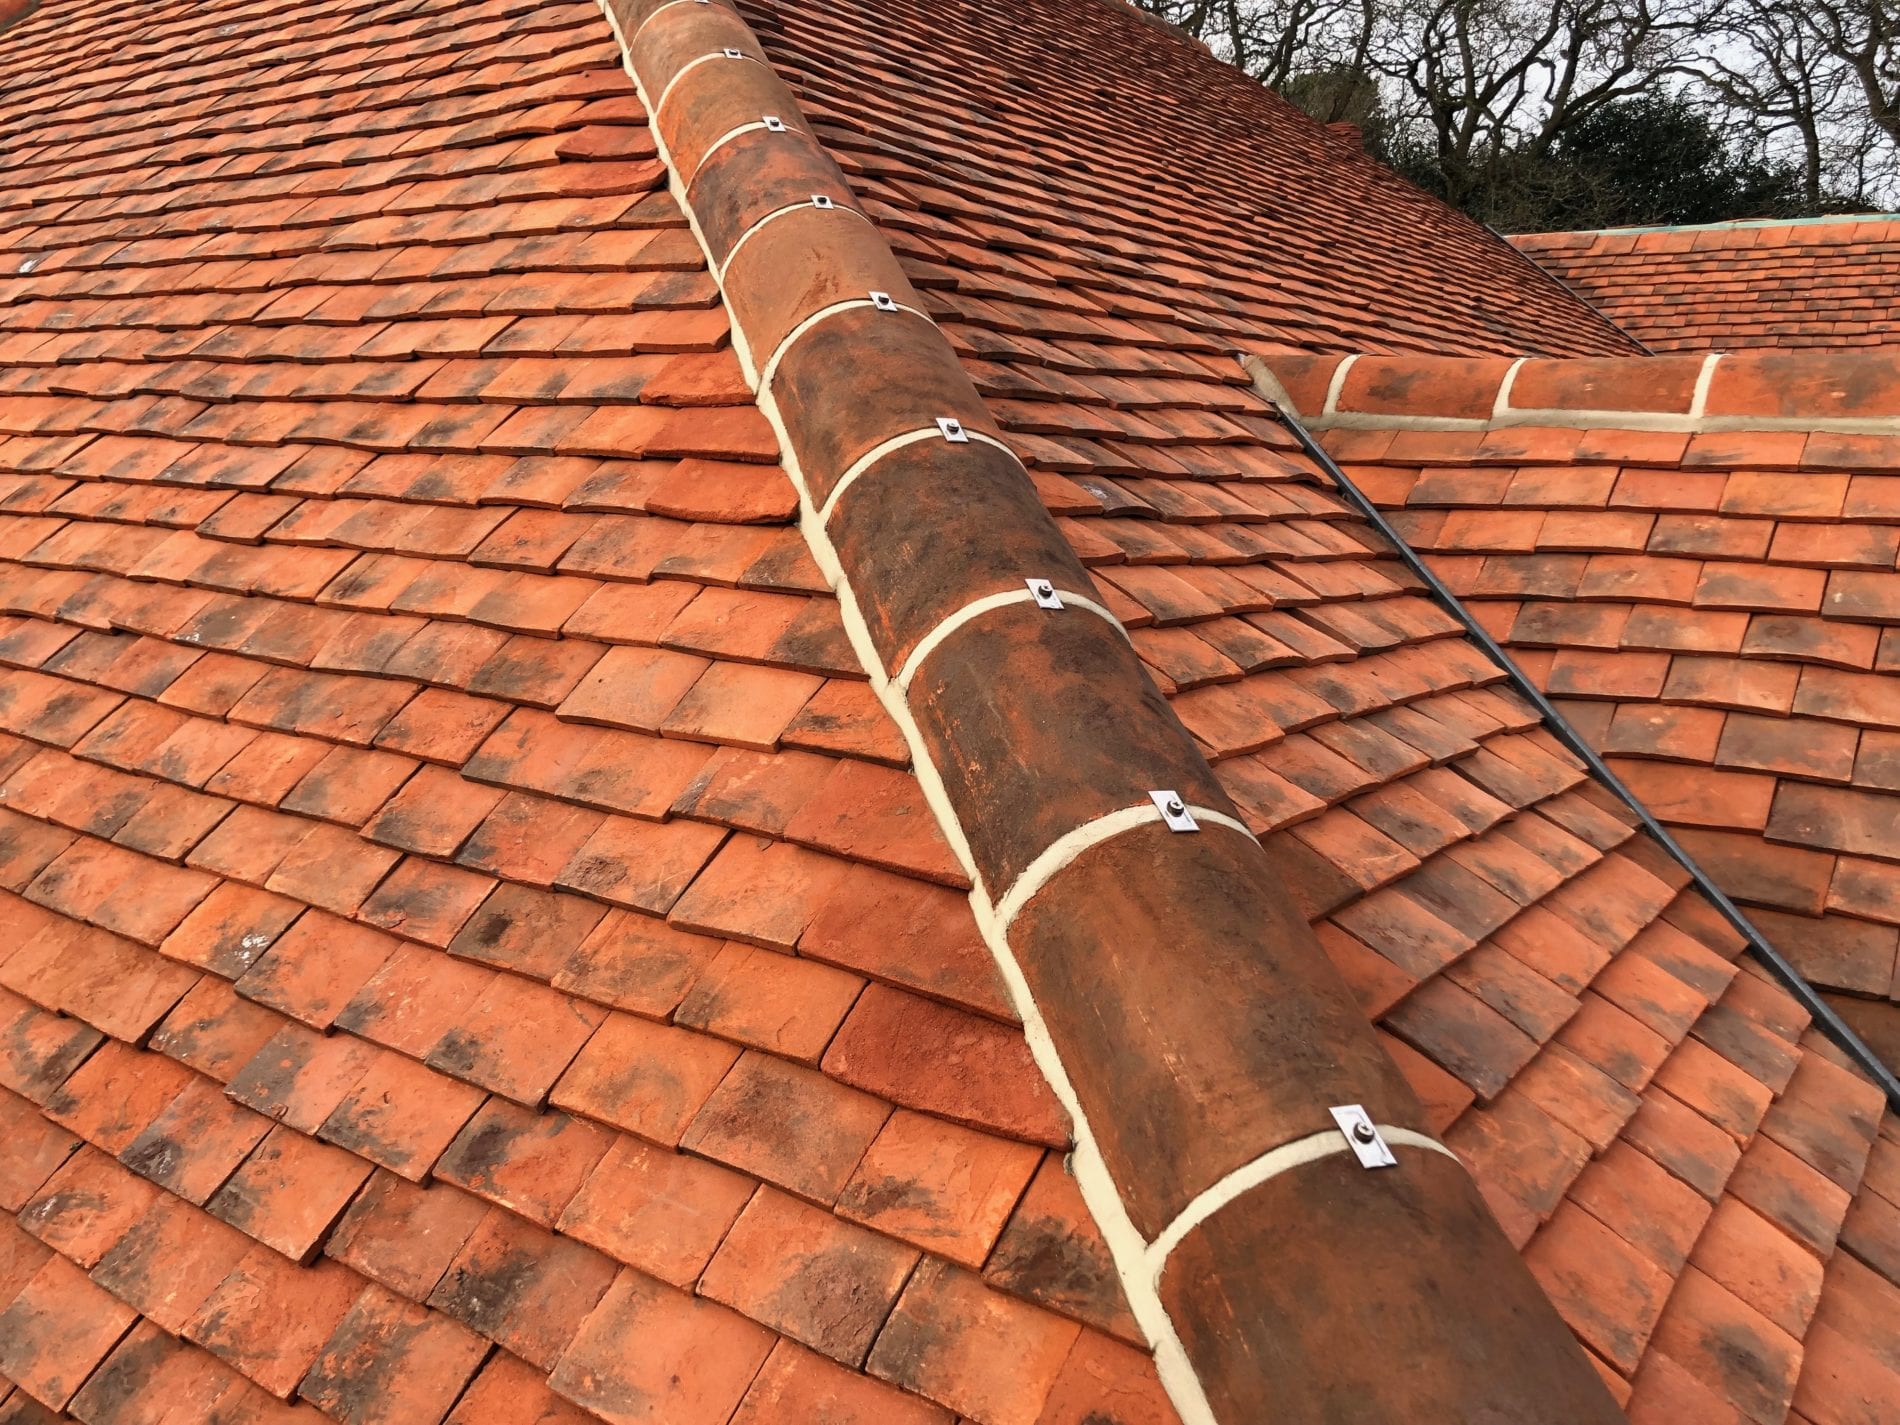 Lifestiles | Handcrafted Clay Roof Tiles